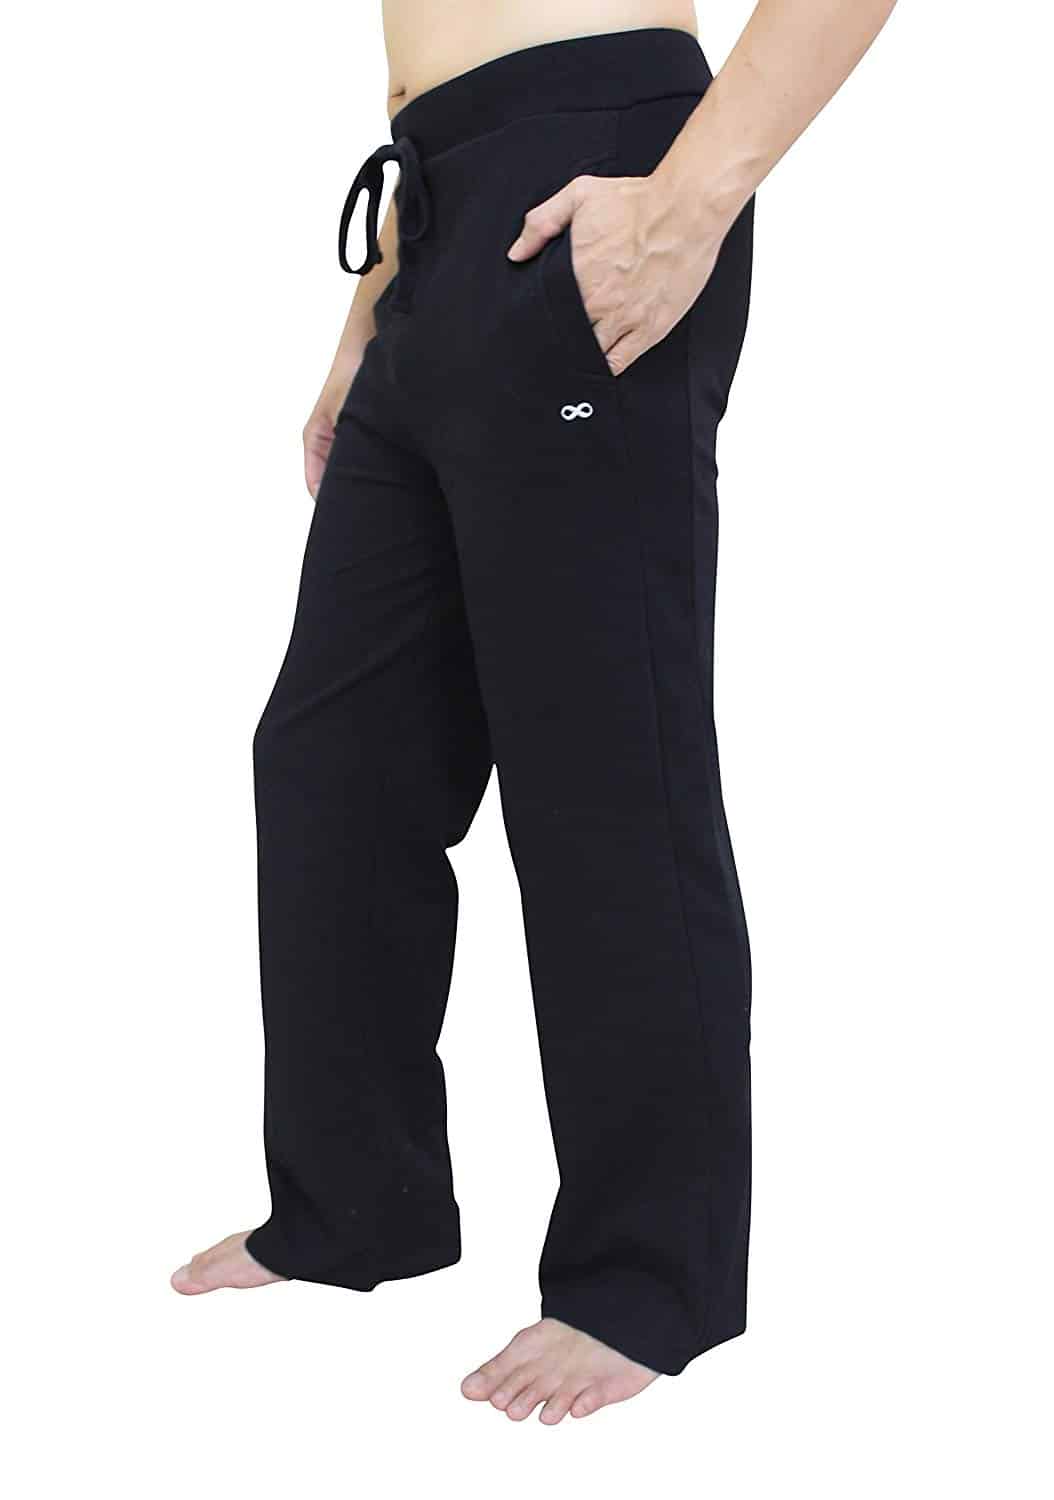 most comfortable yoga wear for men